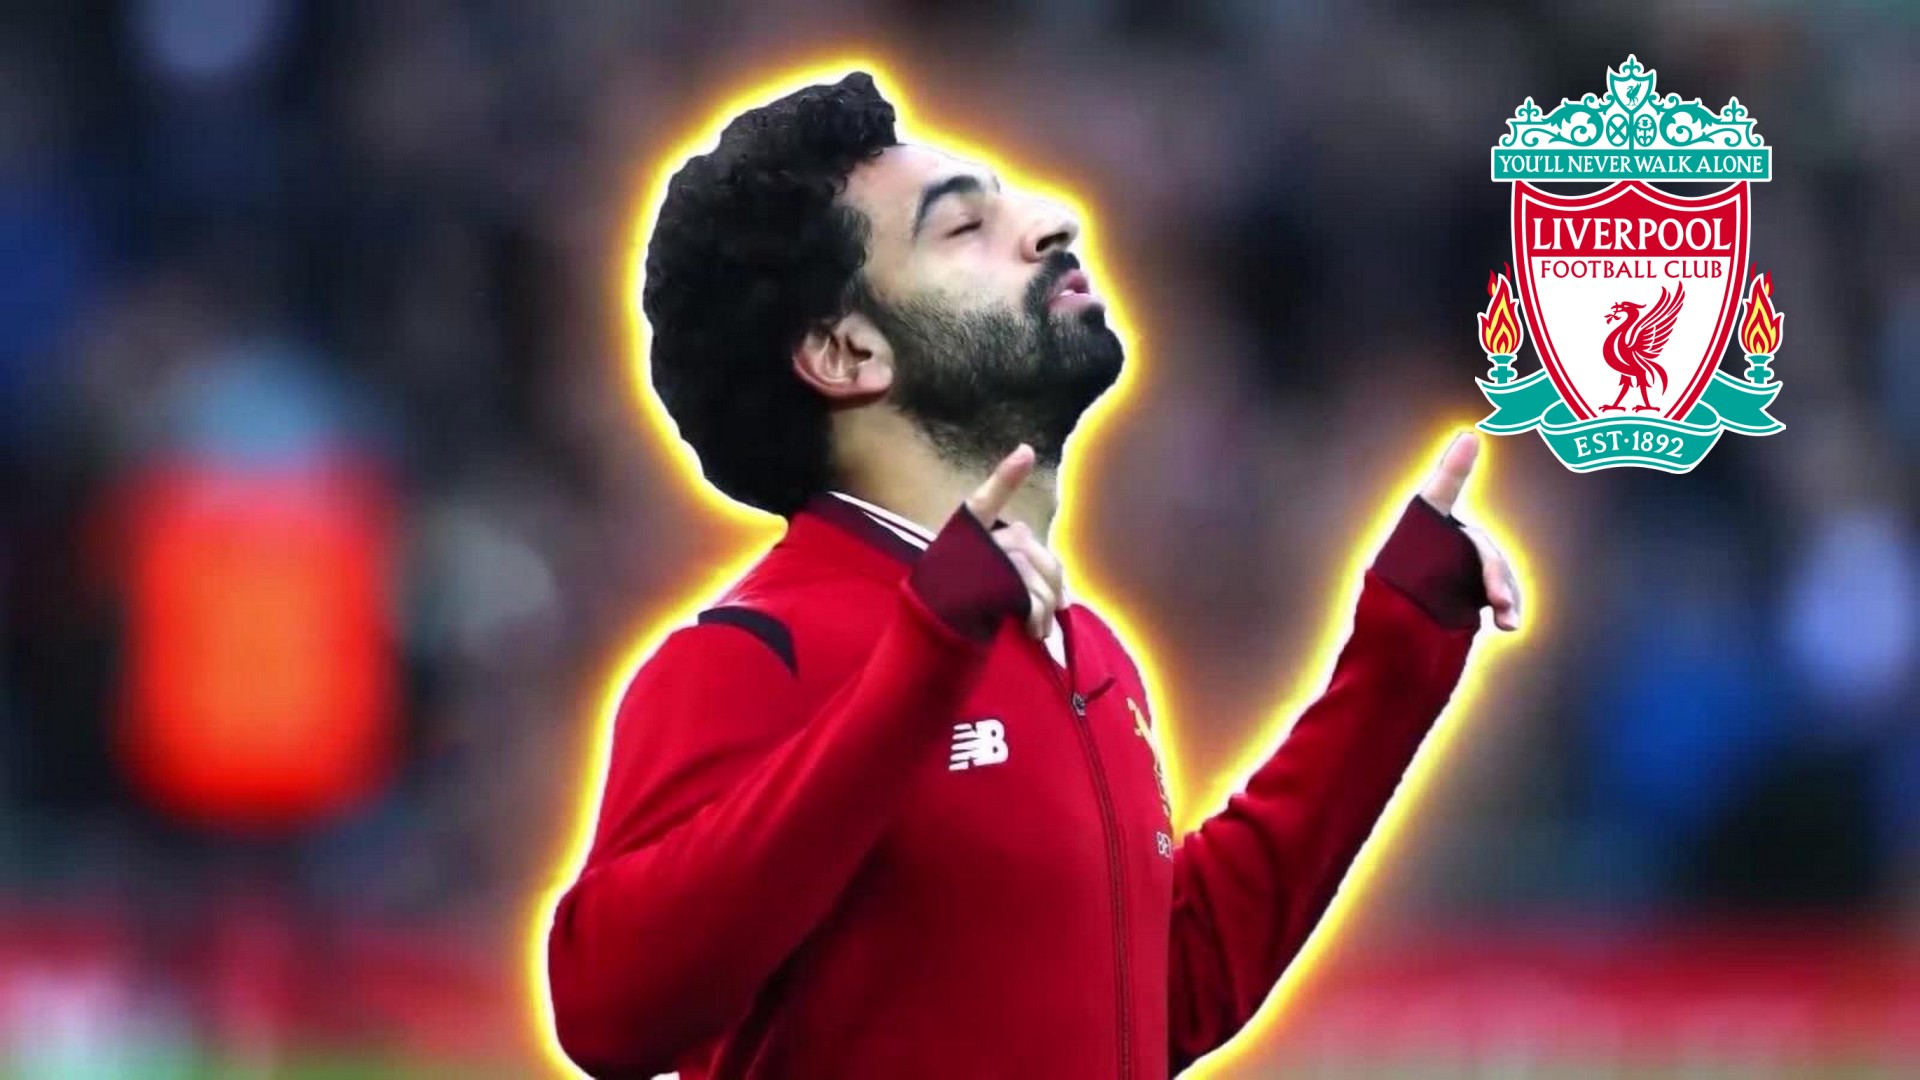 Mohamed Salah Liverpool Wallpaper HD with image resolution 1920x1080 pixel. You can make this wallpaper for your Desktop Computer Backgrounds, Mac Wallpapers, Android Lock screen or iPhone Screensavers